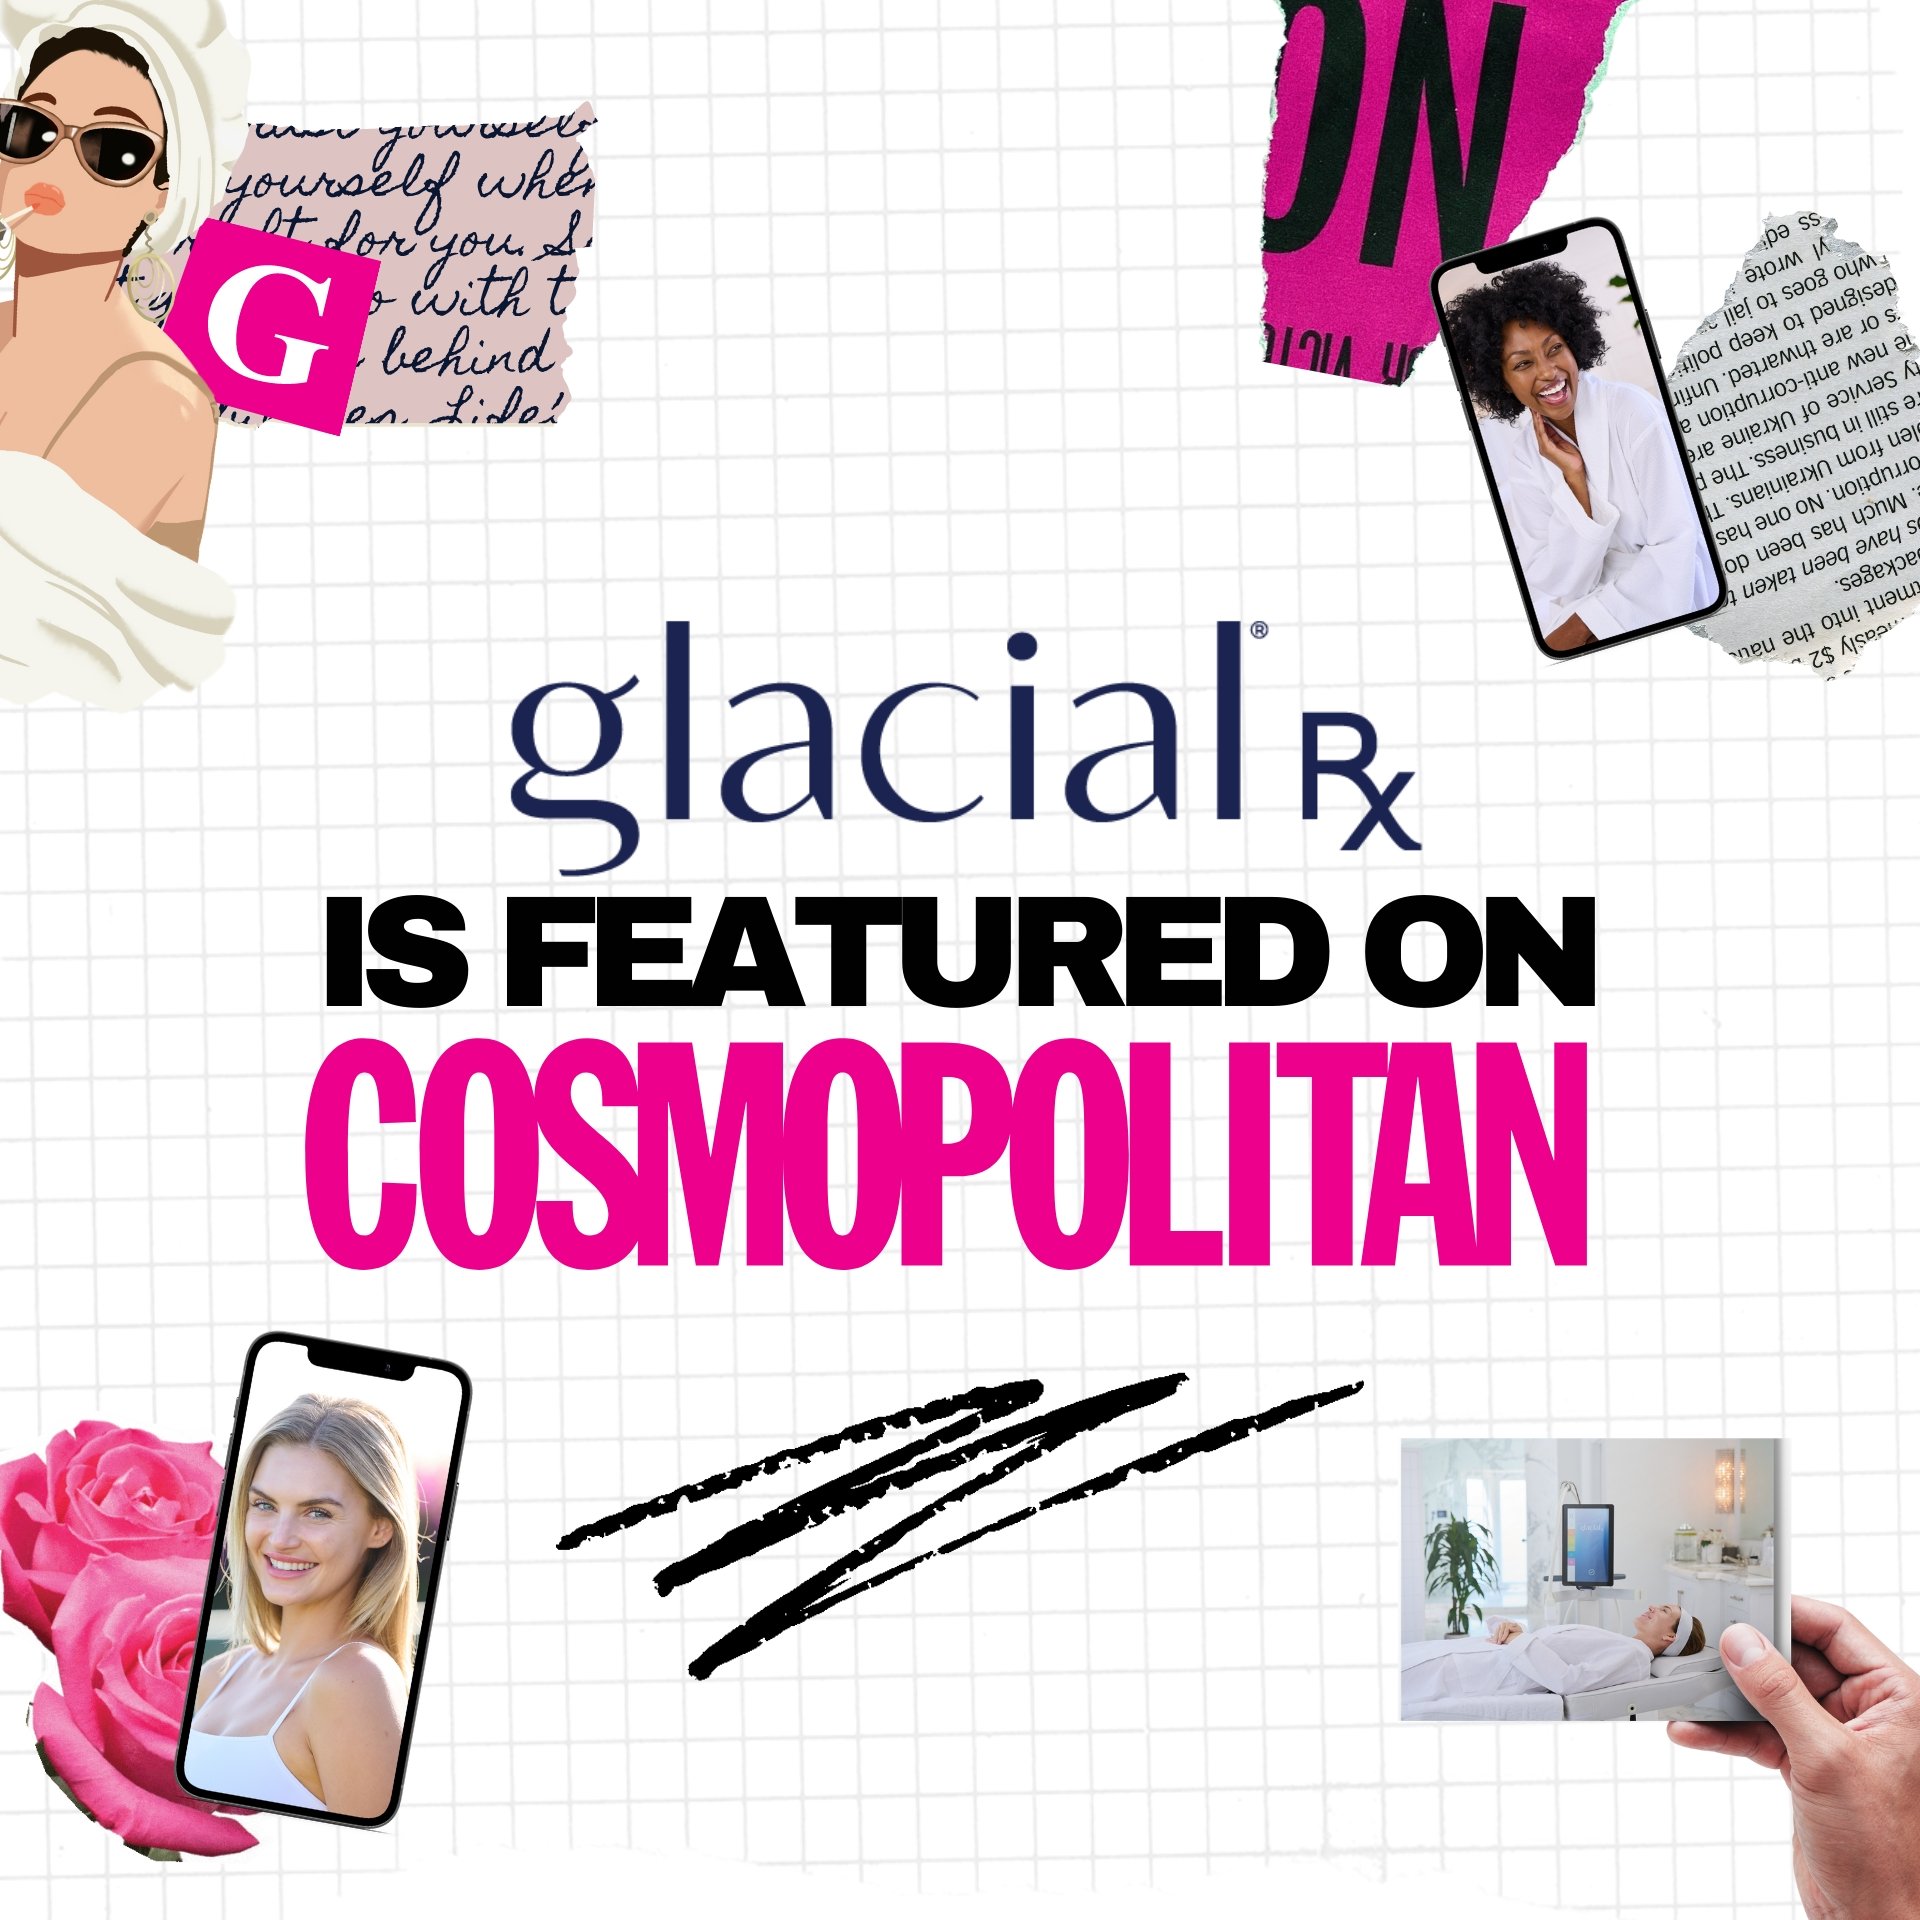 Glacial Rx is featured on Cosmopolitan